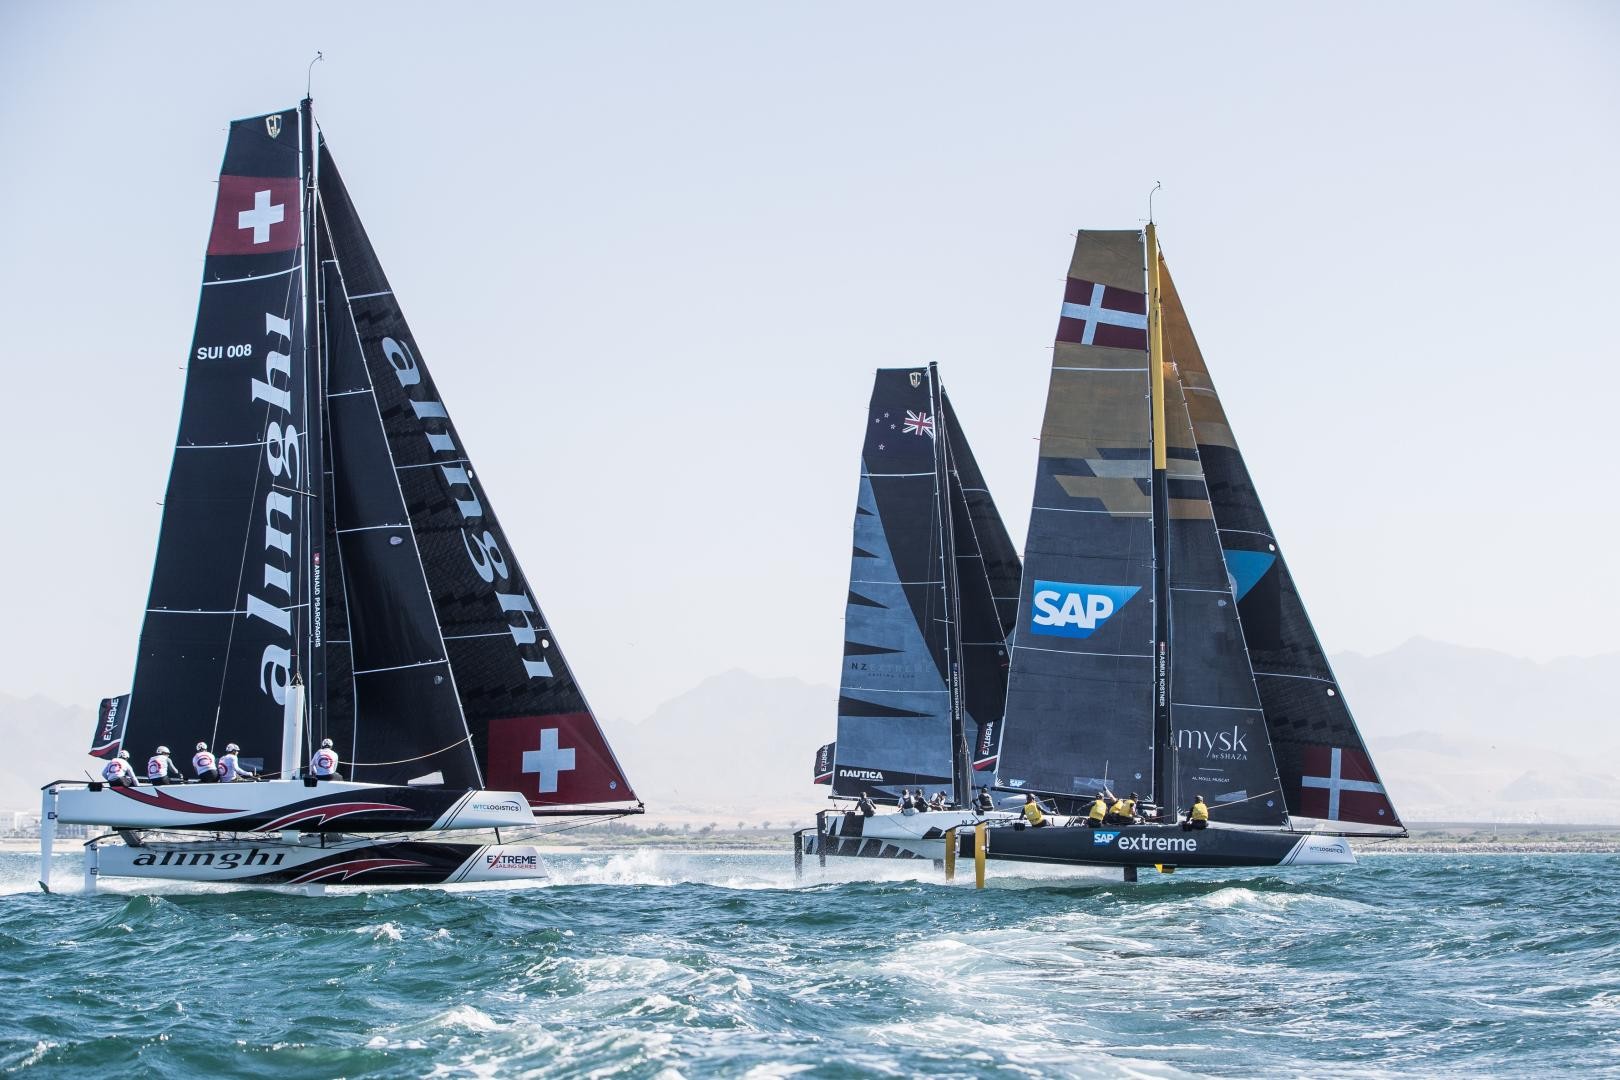 Grassroots Team Portugal is set to meet the the fourth Act of the 2018 Extreme Sailing Series™ professional crews on the start line in Cascais